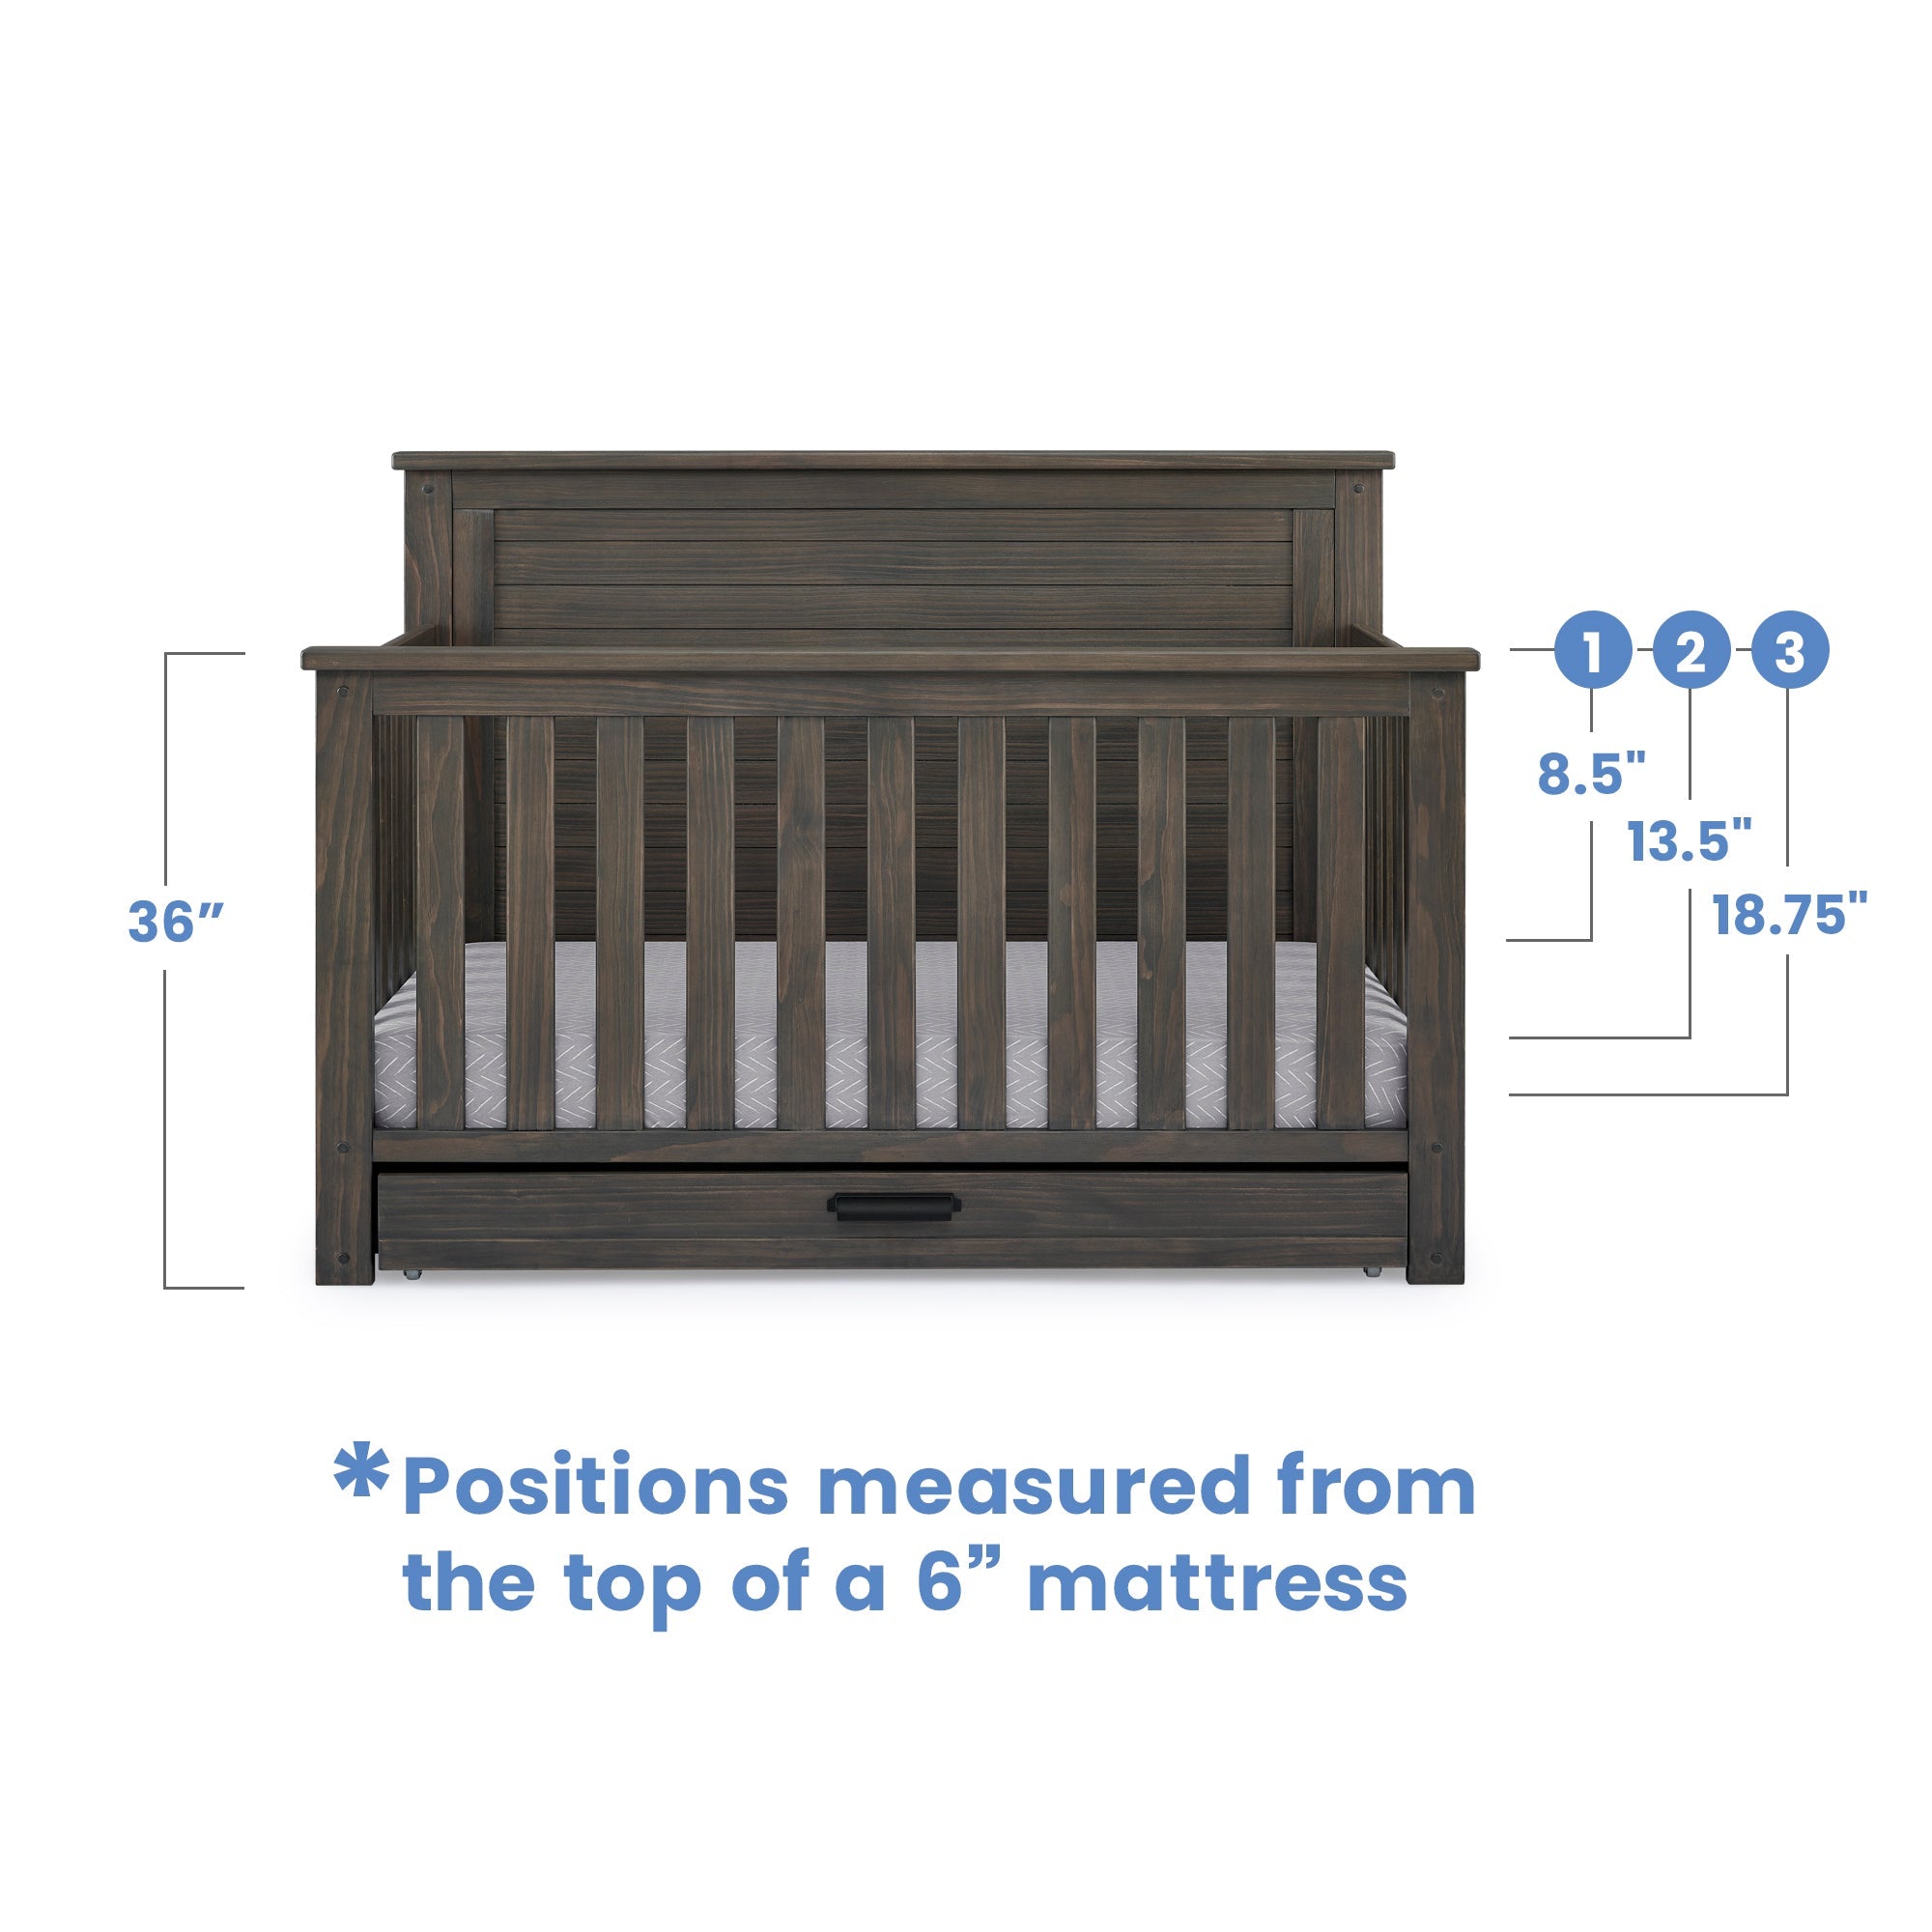 Simmons Kids Caden 6-in-1 Convertible Crib with Trundle Drawer - Rustic Grey-DELTA-Little Giant Kidz